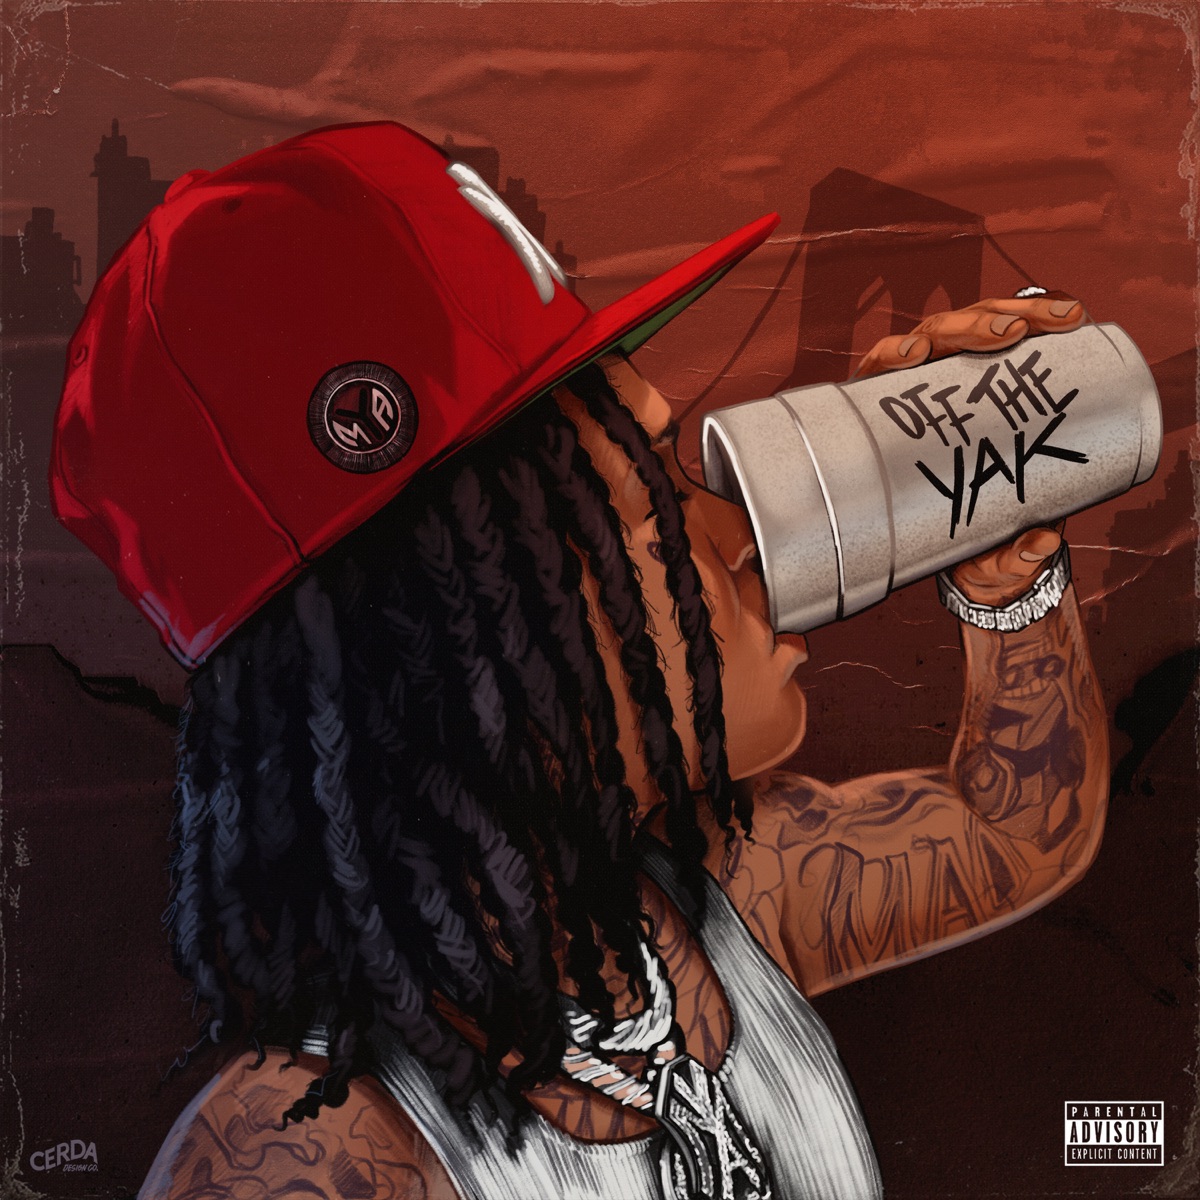 Dan Maken Nominaal Ooouuu Remix (feat. 50 Cent) - Single by Young M.A on Apple Music